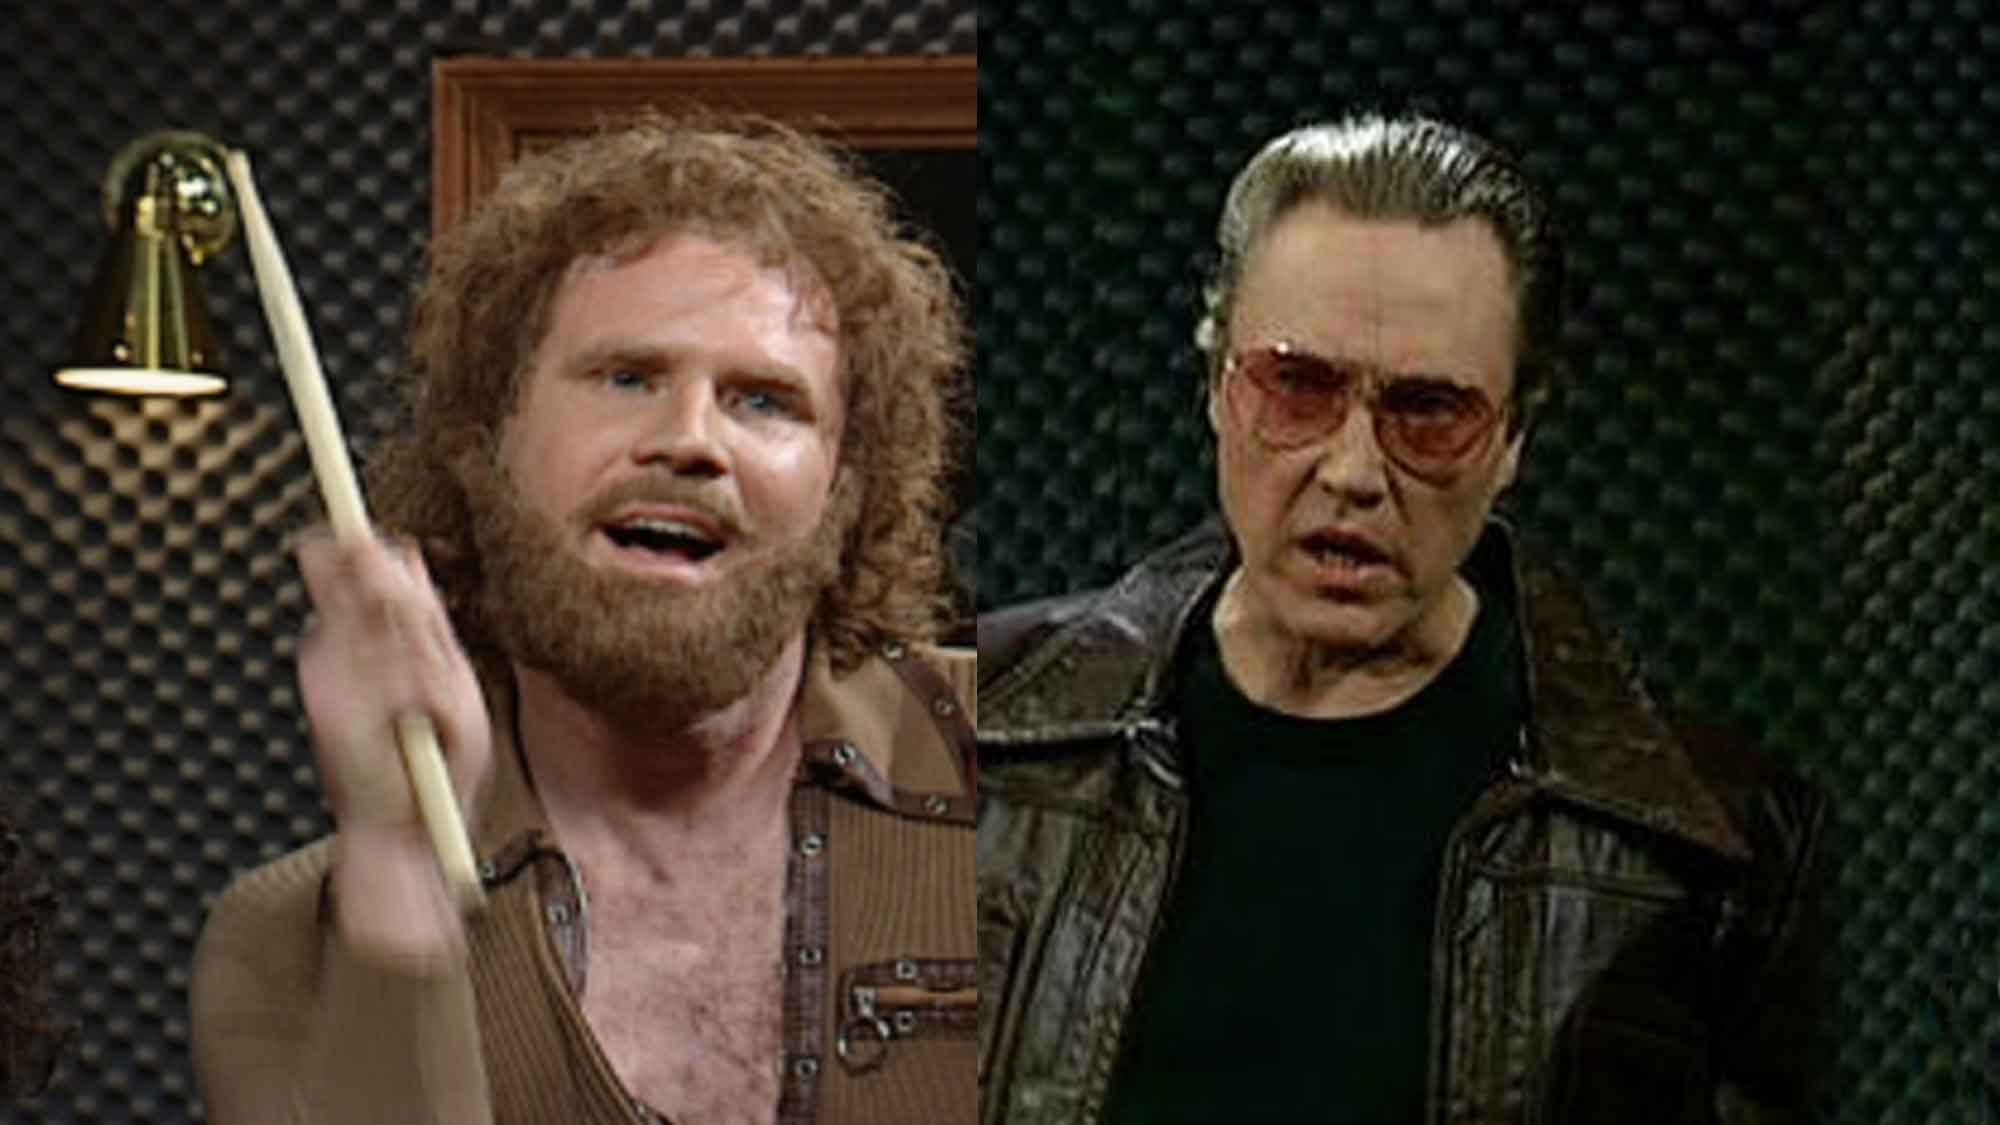 More Cowbell - Remembering The Famous SNL Skit